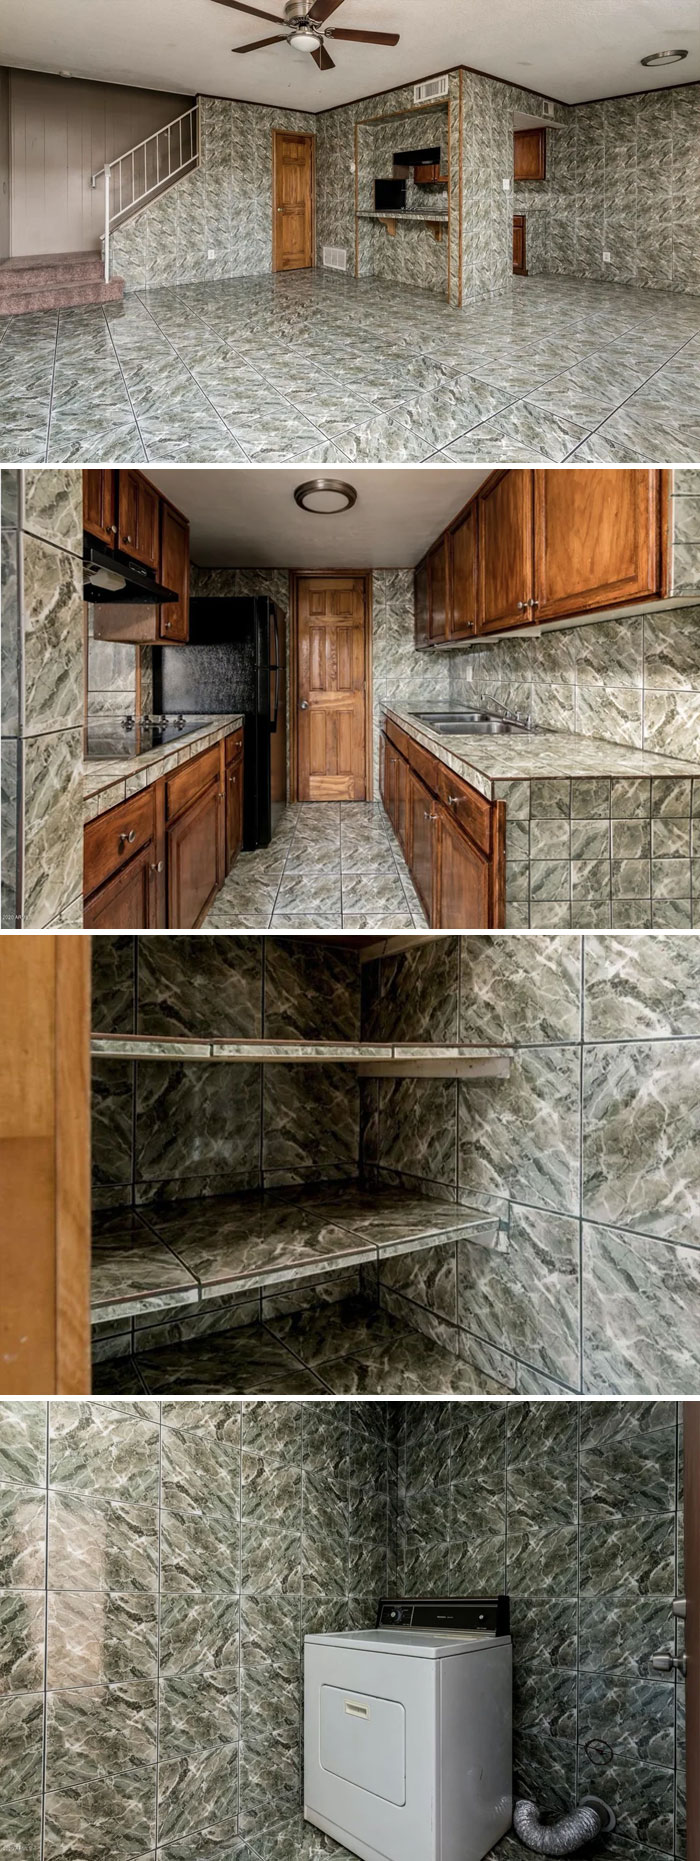 Someone Found A Great Home Improvement Deal On Tile...